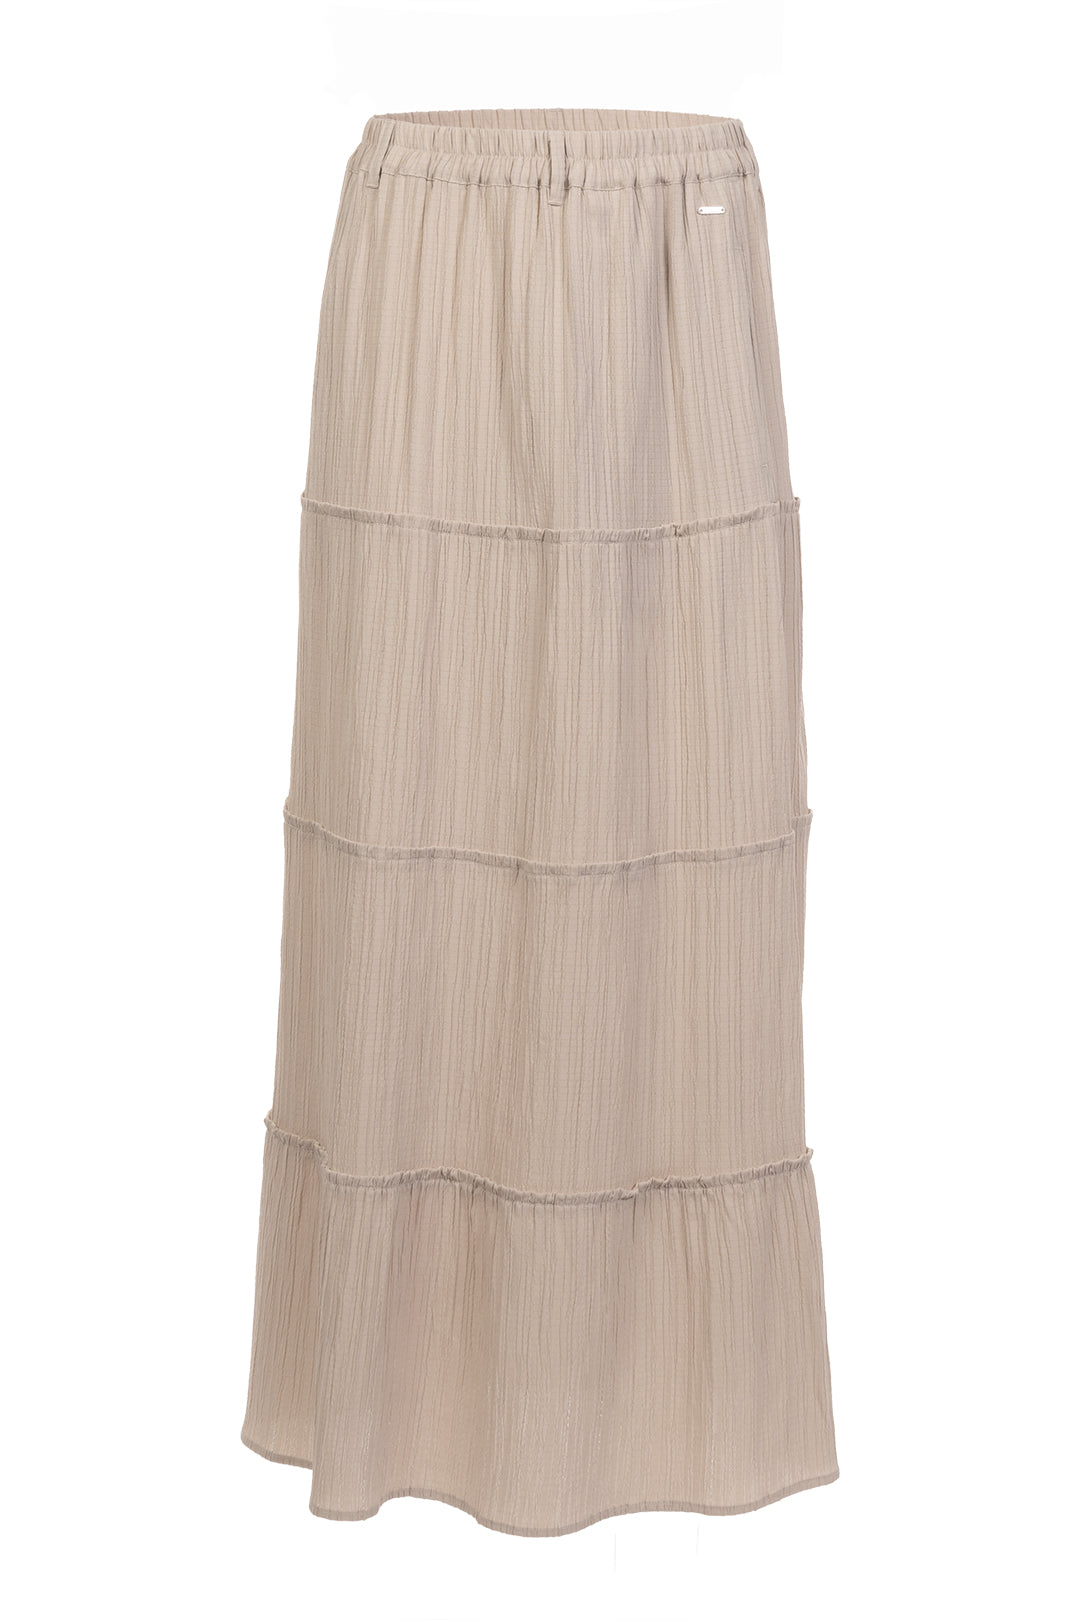 Beige midi skirt with cutouts | River